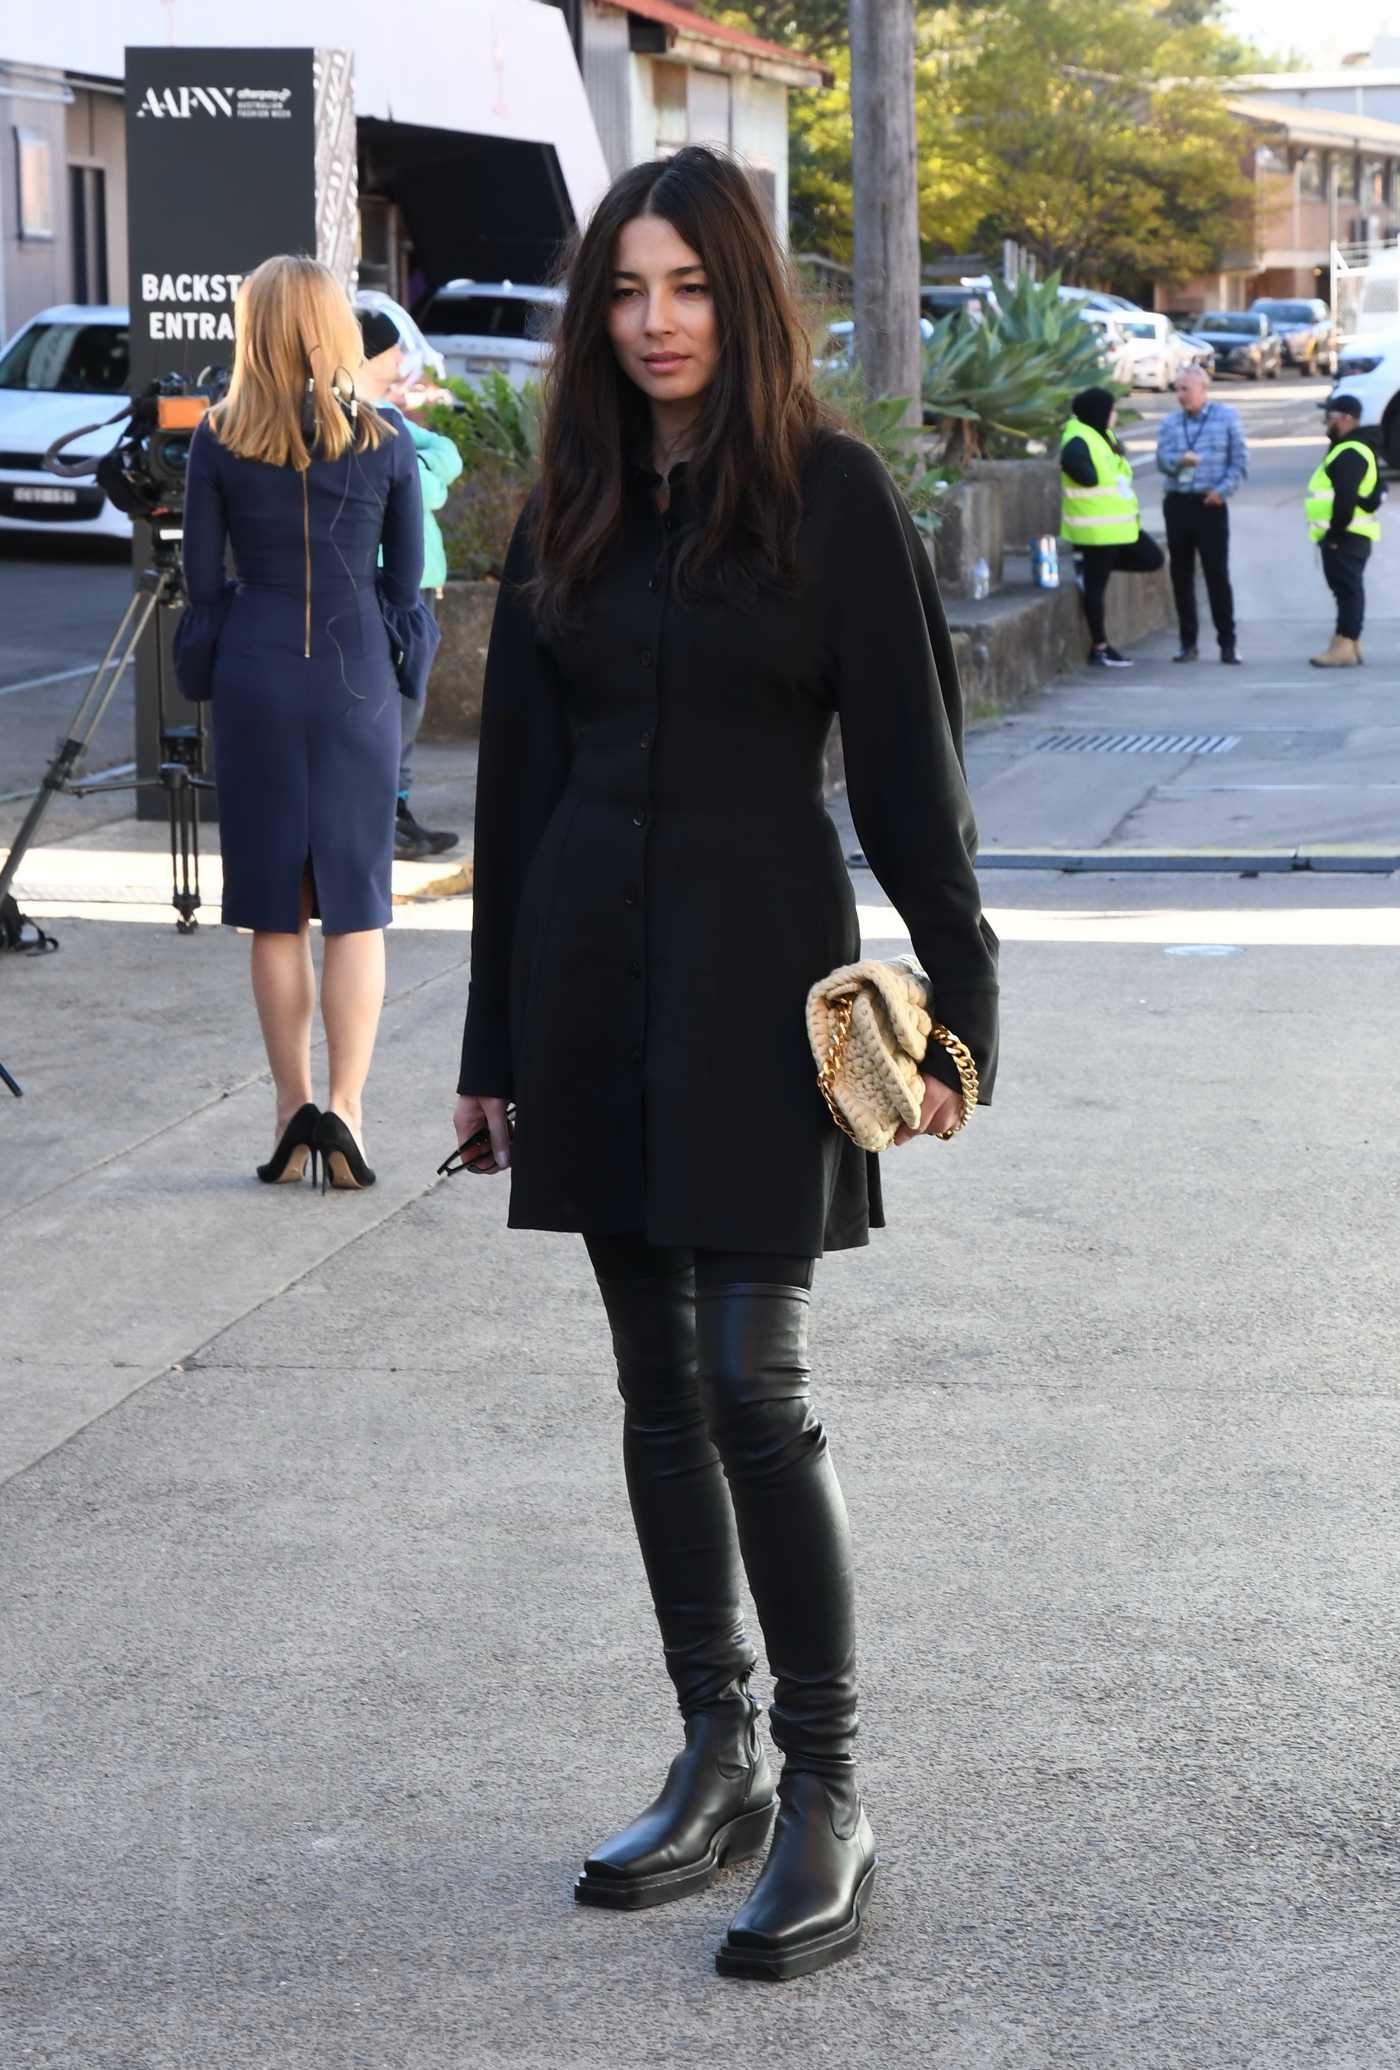 Jessica Gomes in a Black Outfit Was Seen at Sydney Fashion Week at Carriageworks in Sydney 05/31/2021